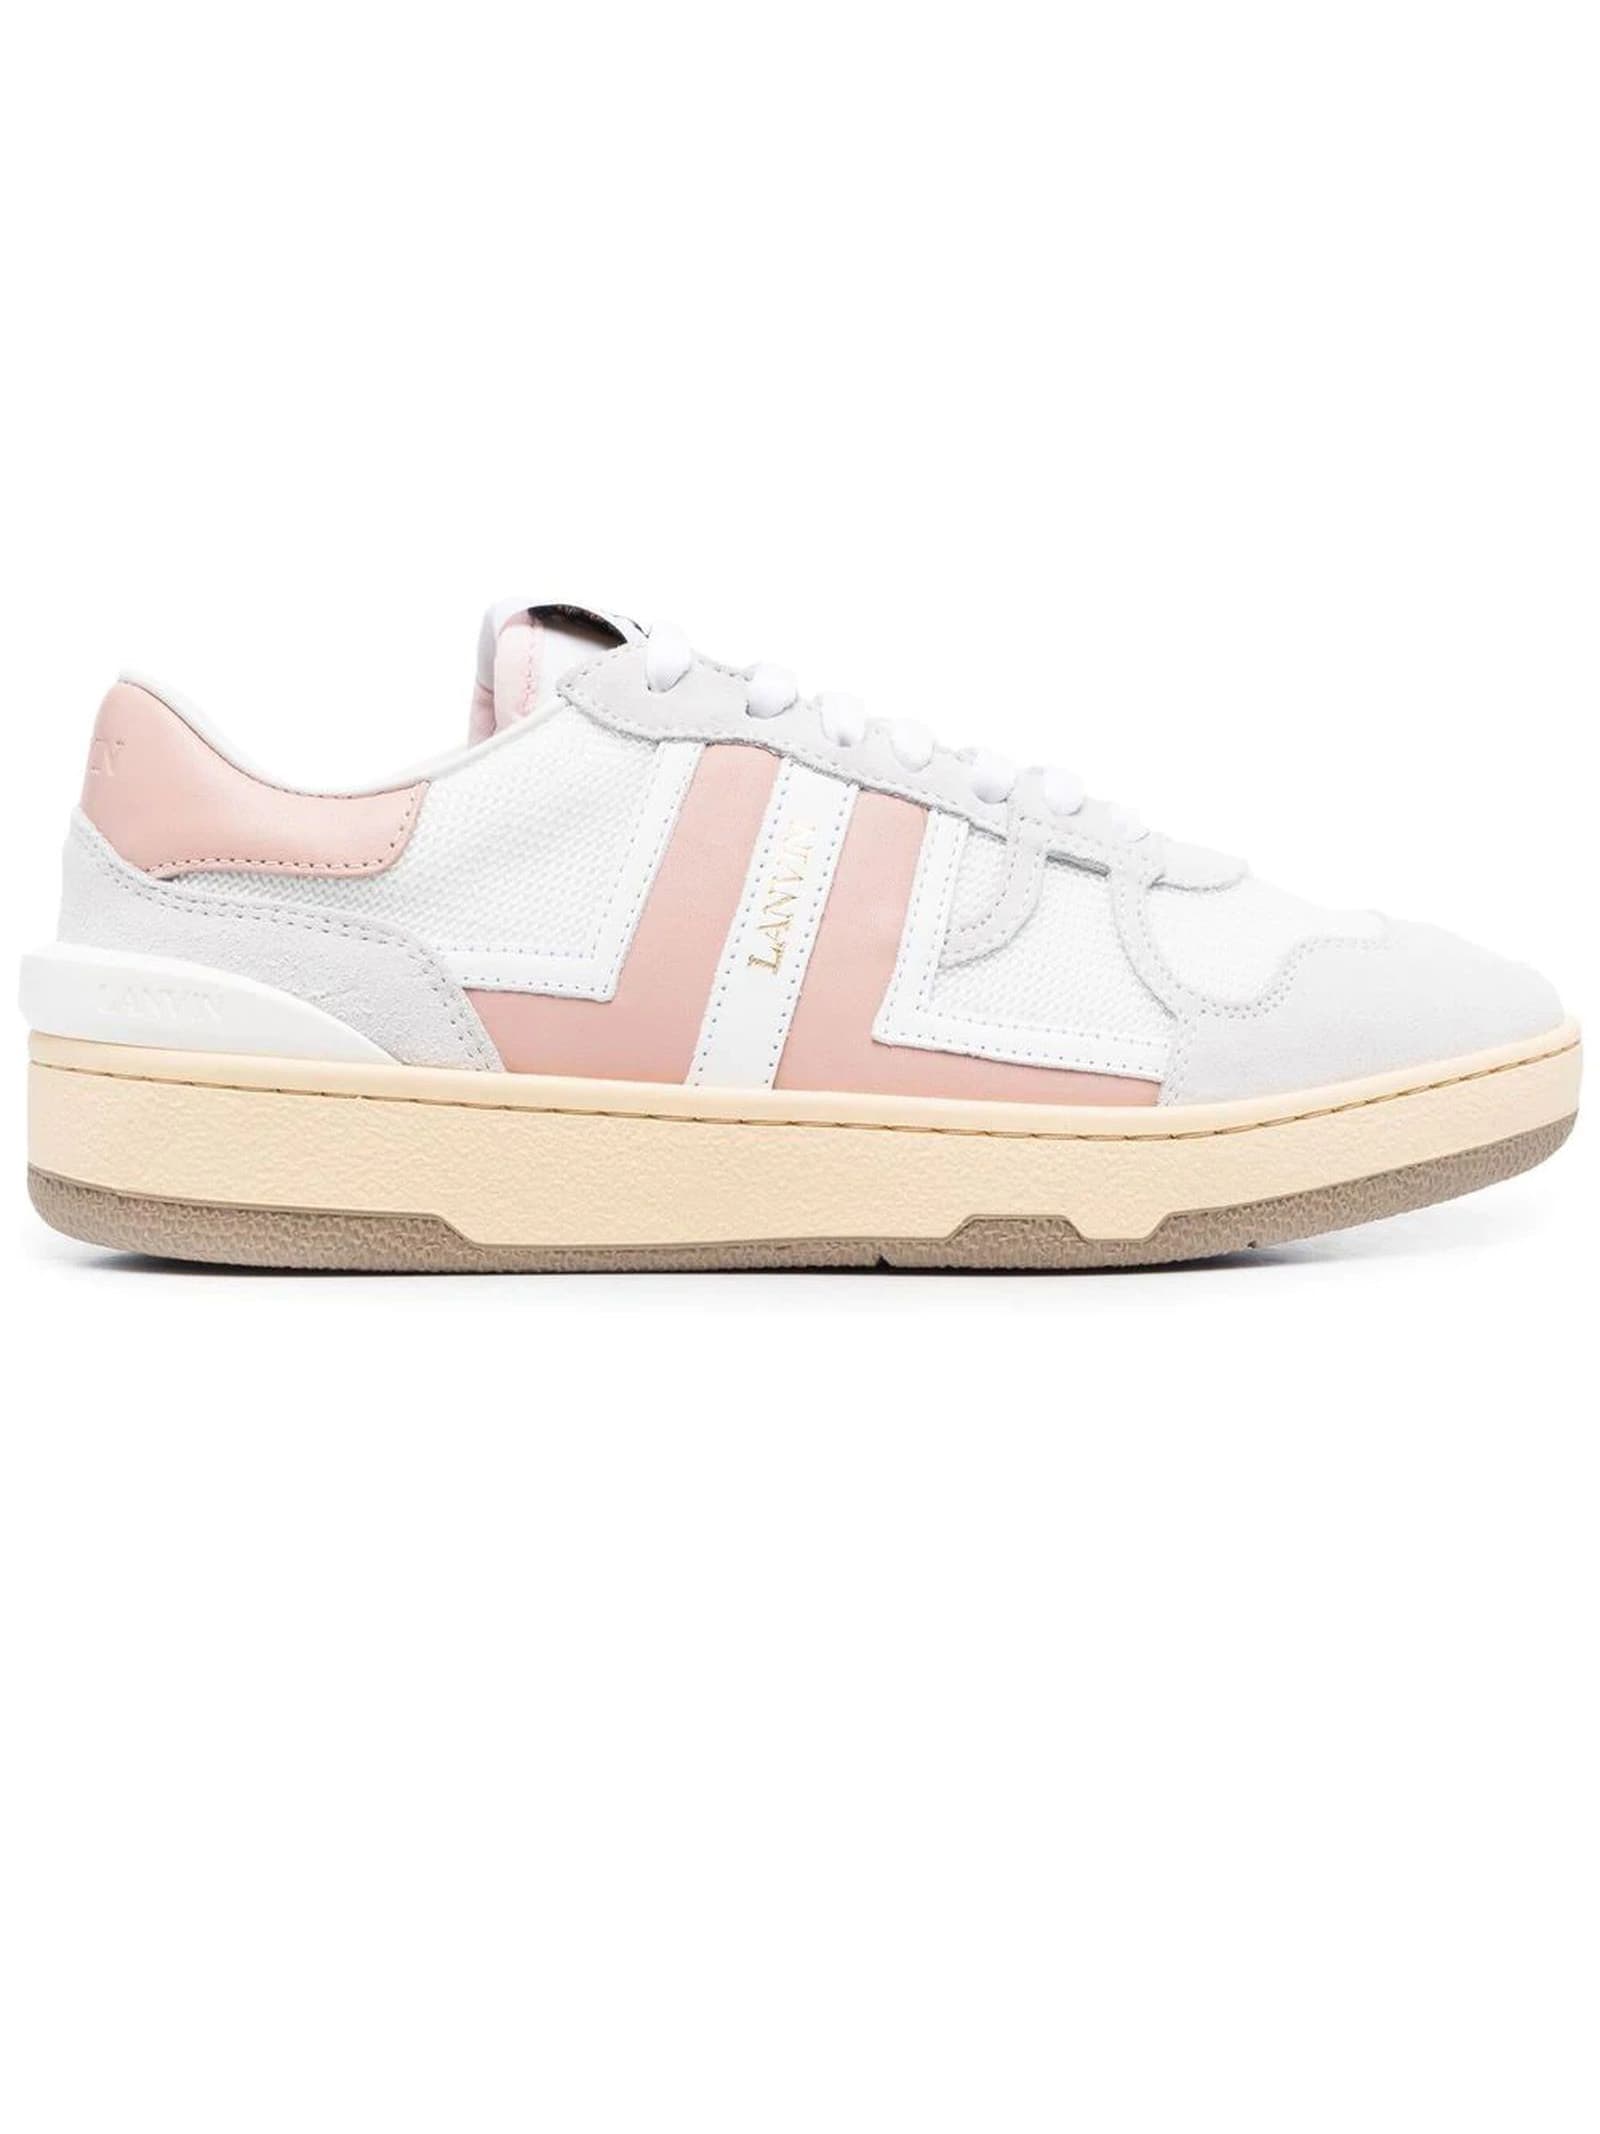 Lanvin White Leather Clay Sneakers